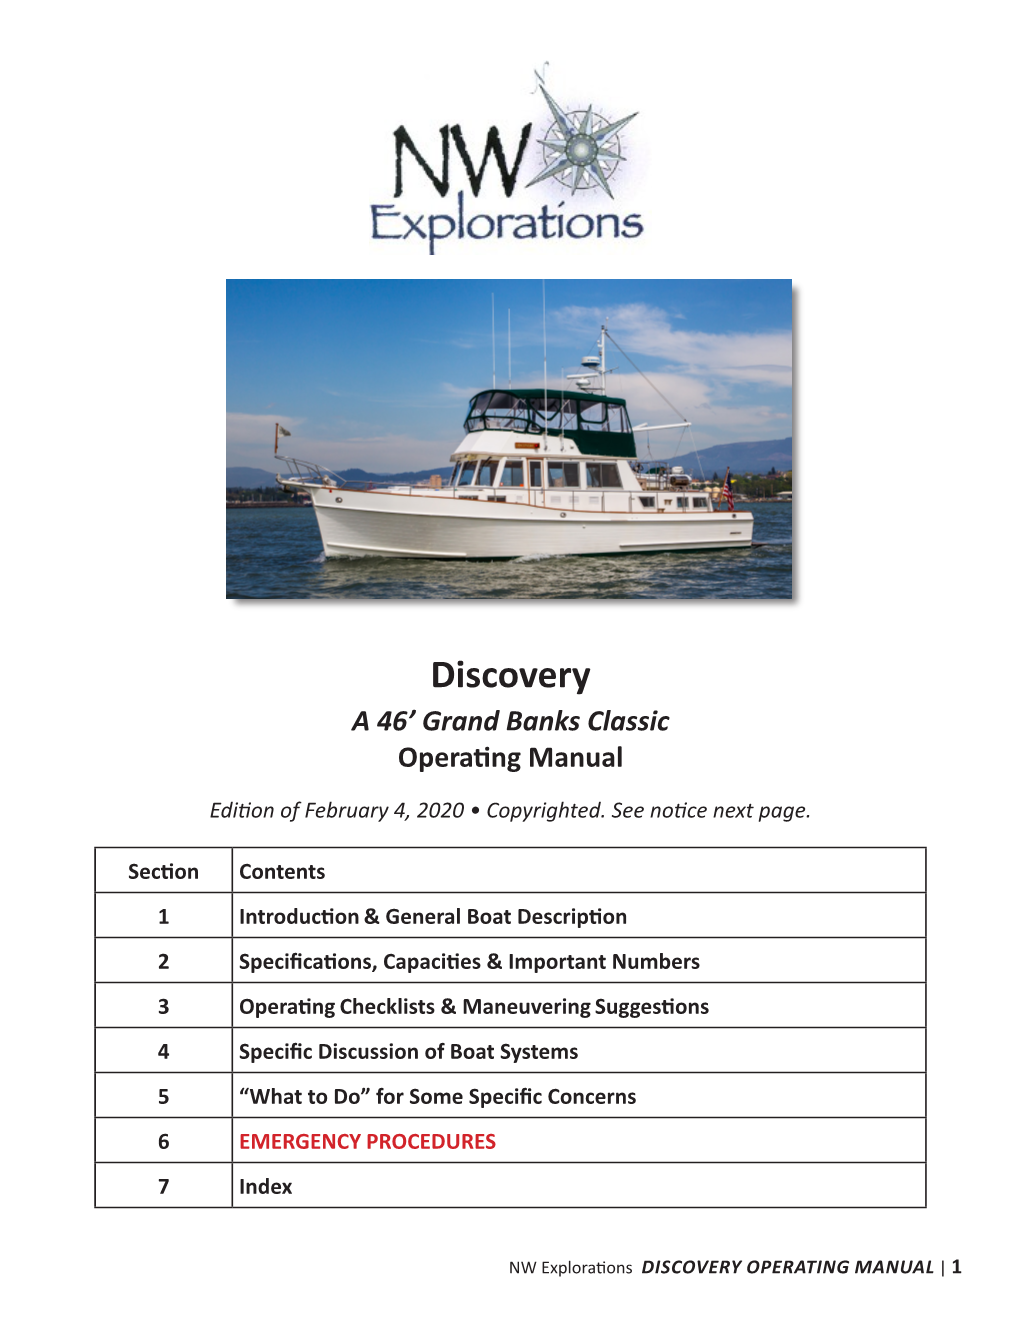 Discovery a 46’ Grand Banks Classic Operating Manual